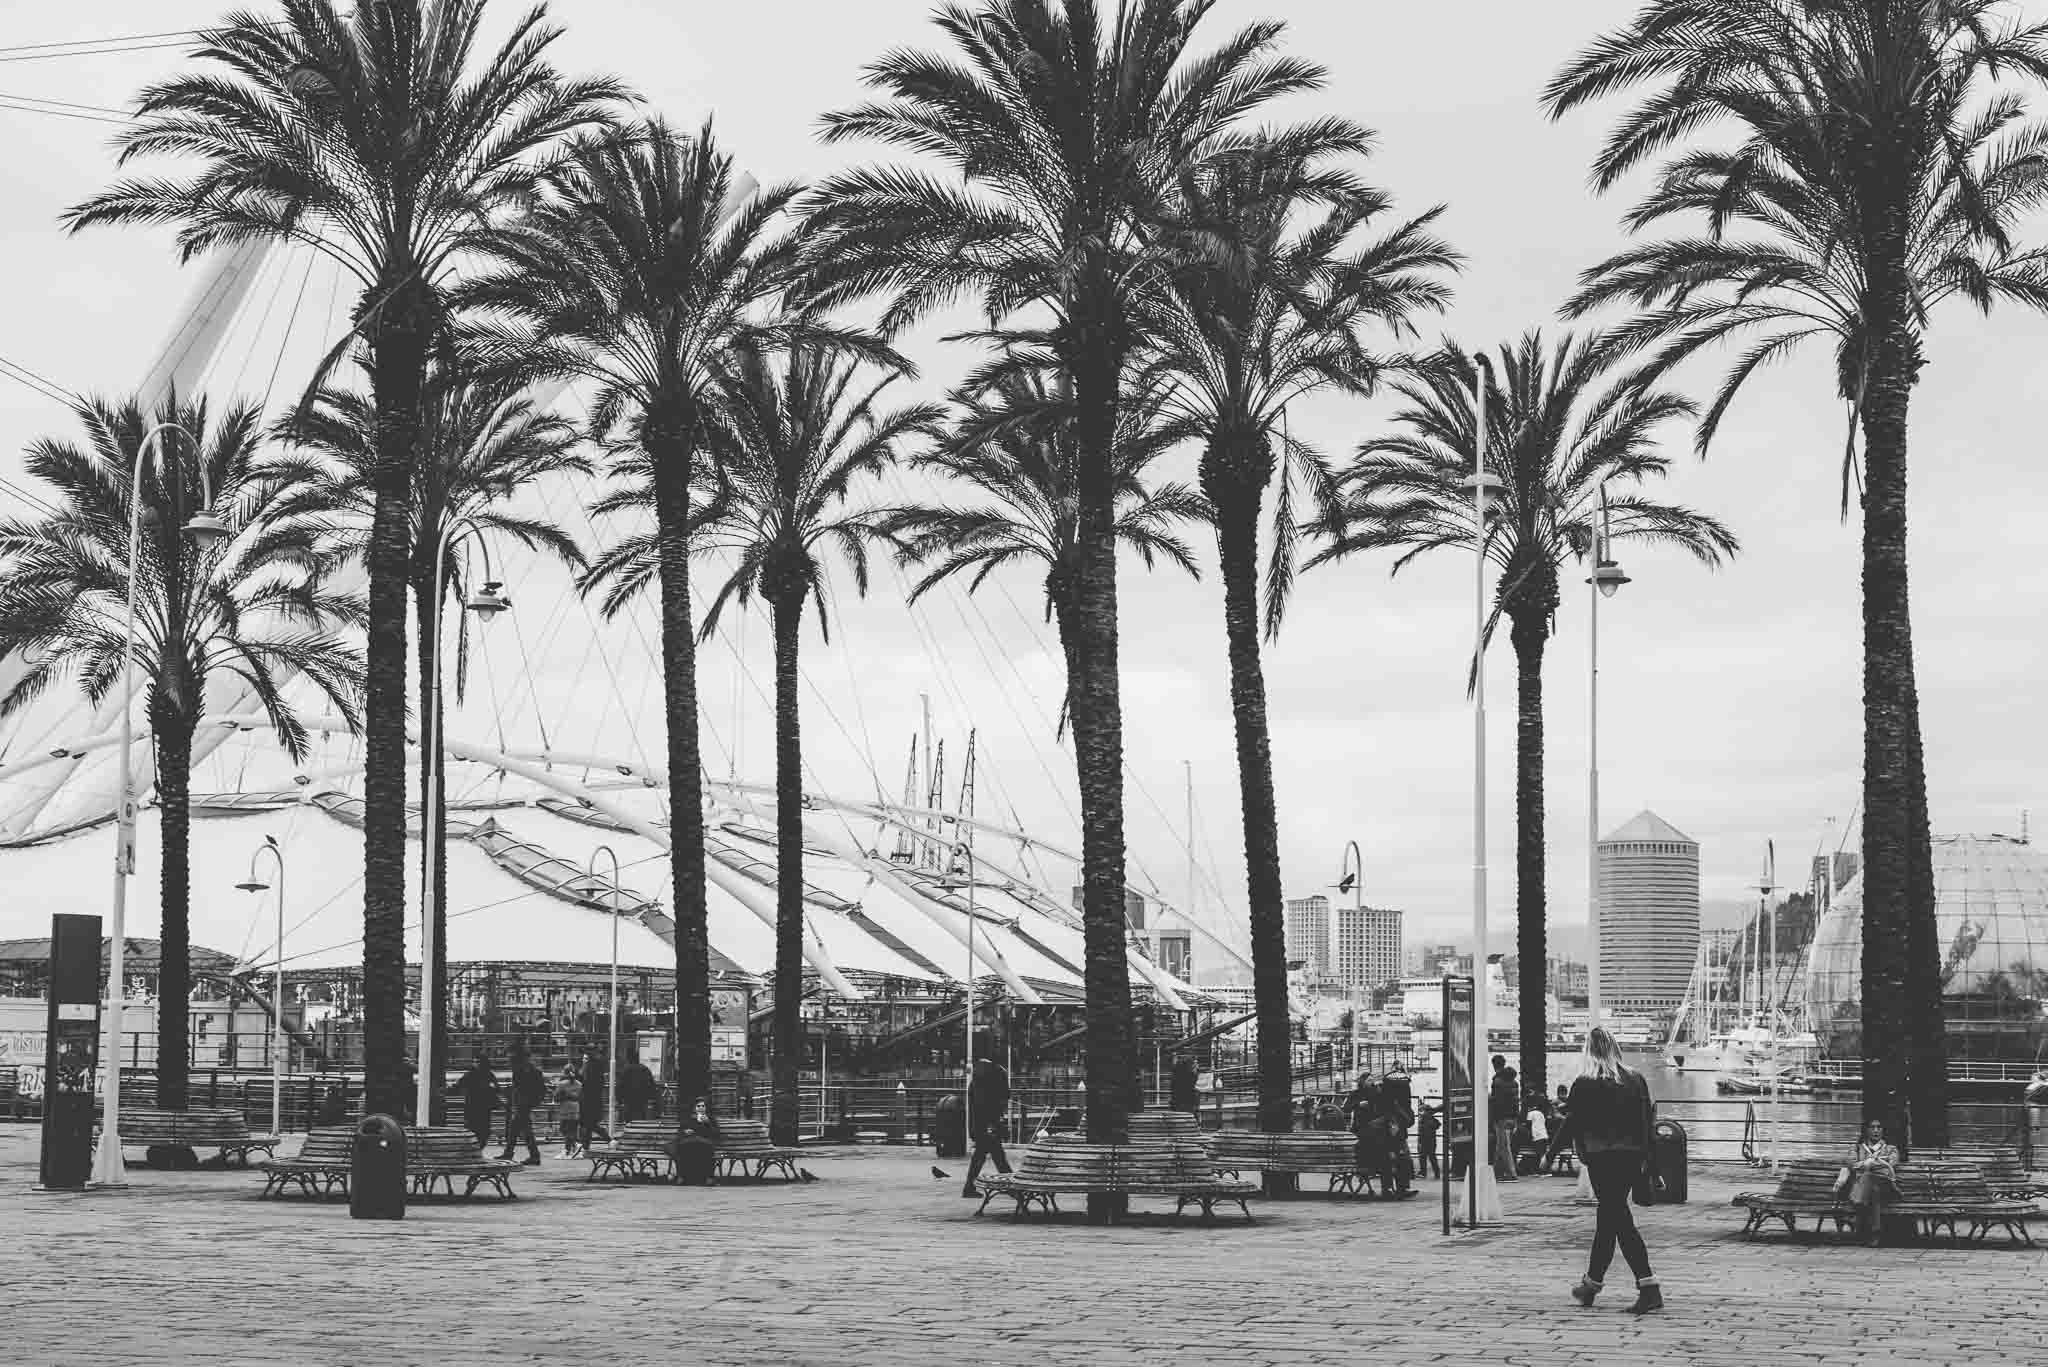 Black and white moody photography of palm trees on a cloudy day at the port of Genova, Italy